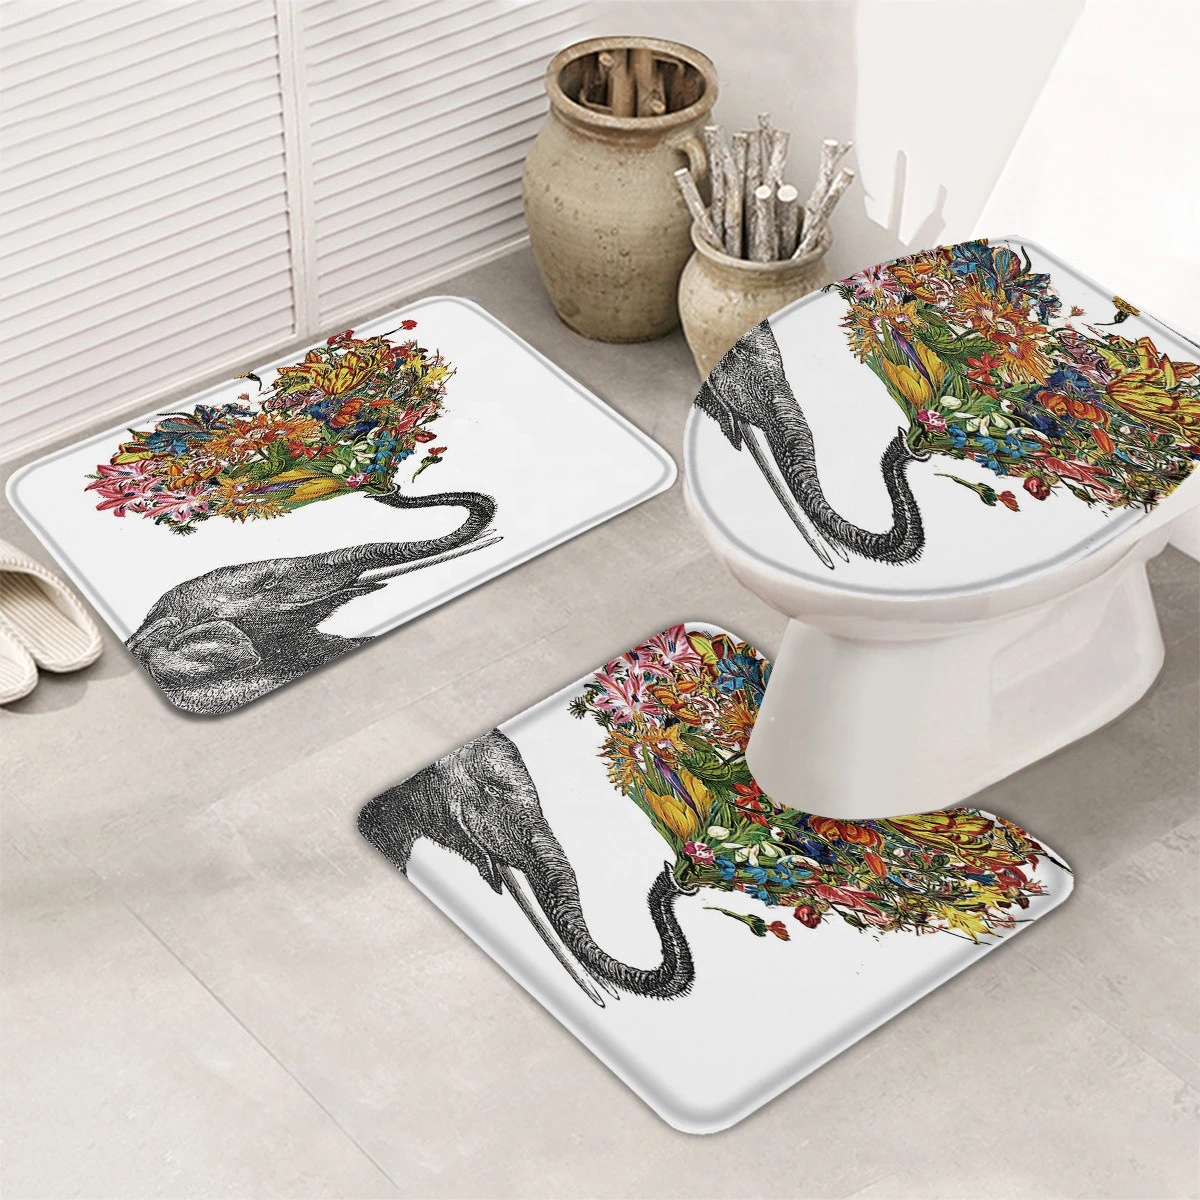 Hot selling Bohemia style flower and elephant printing design 3pcs bath mat set with toilet lip cover and floor rug